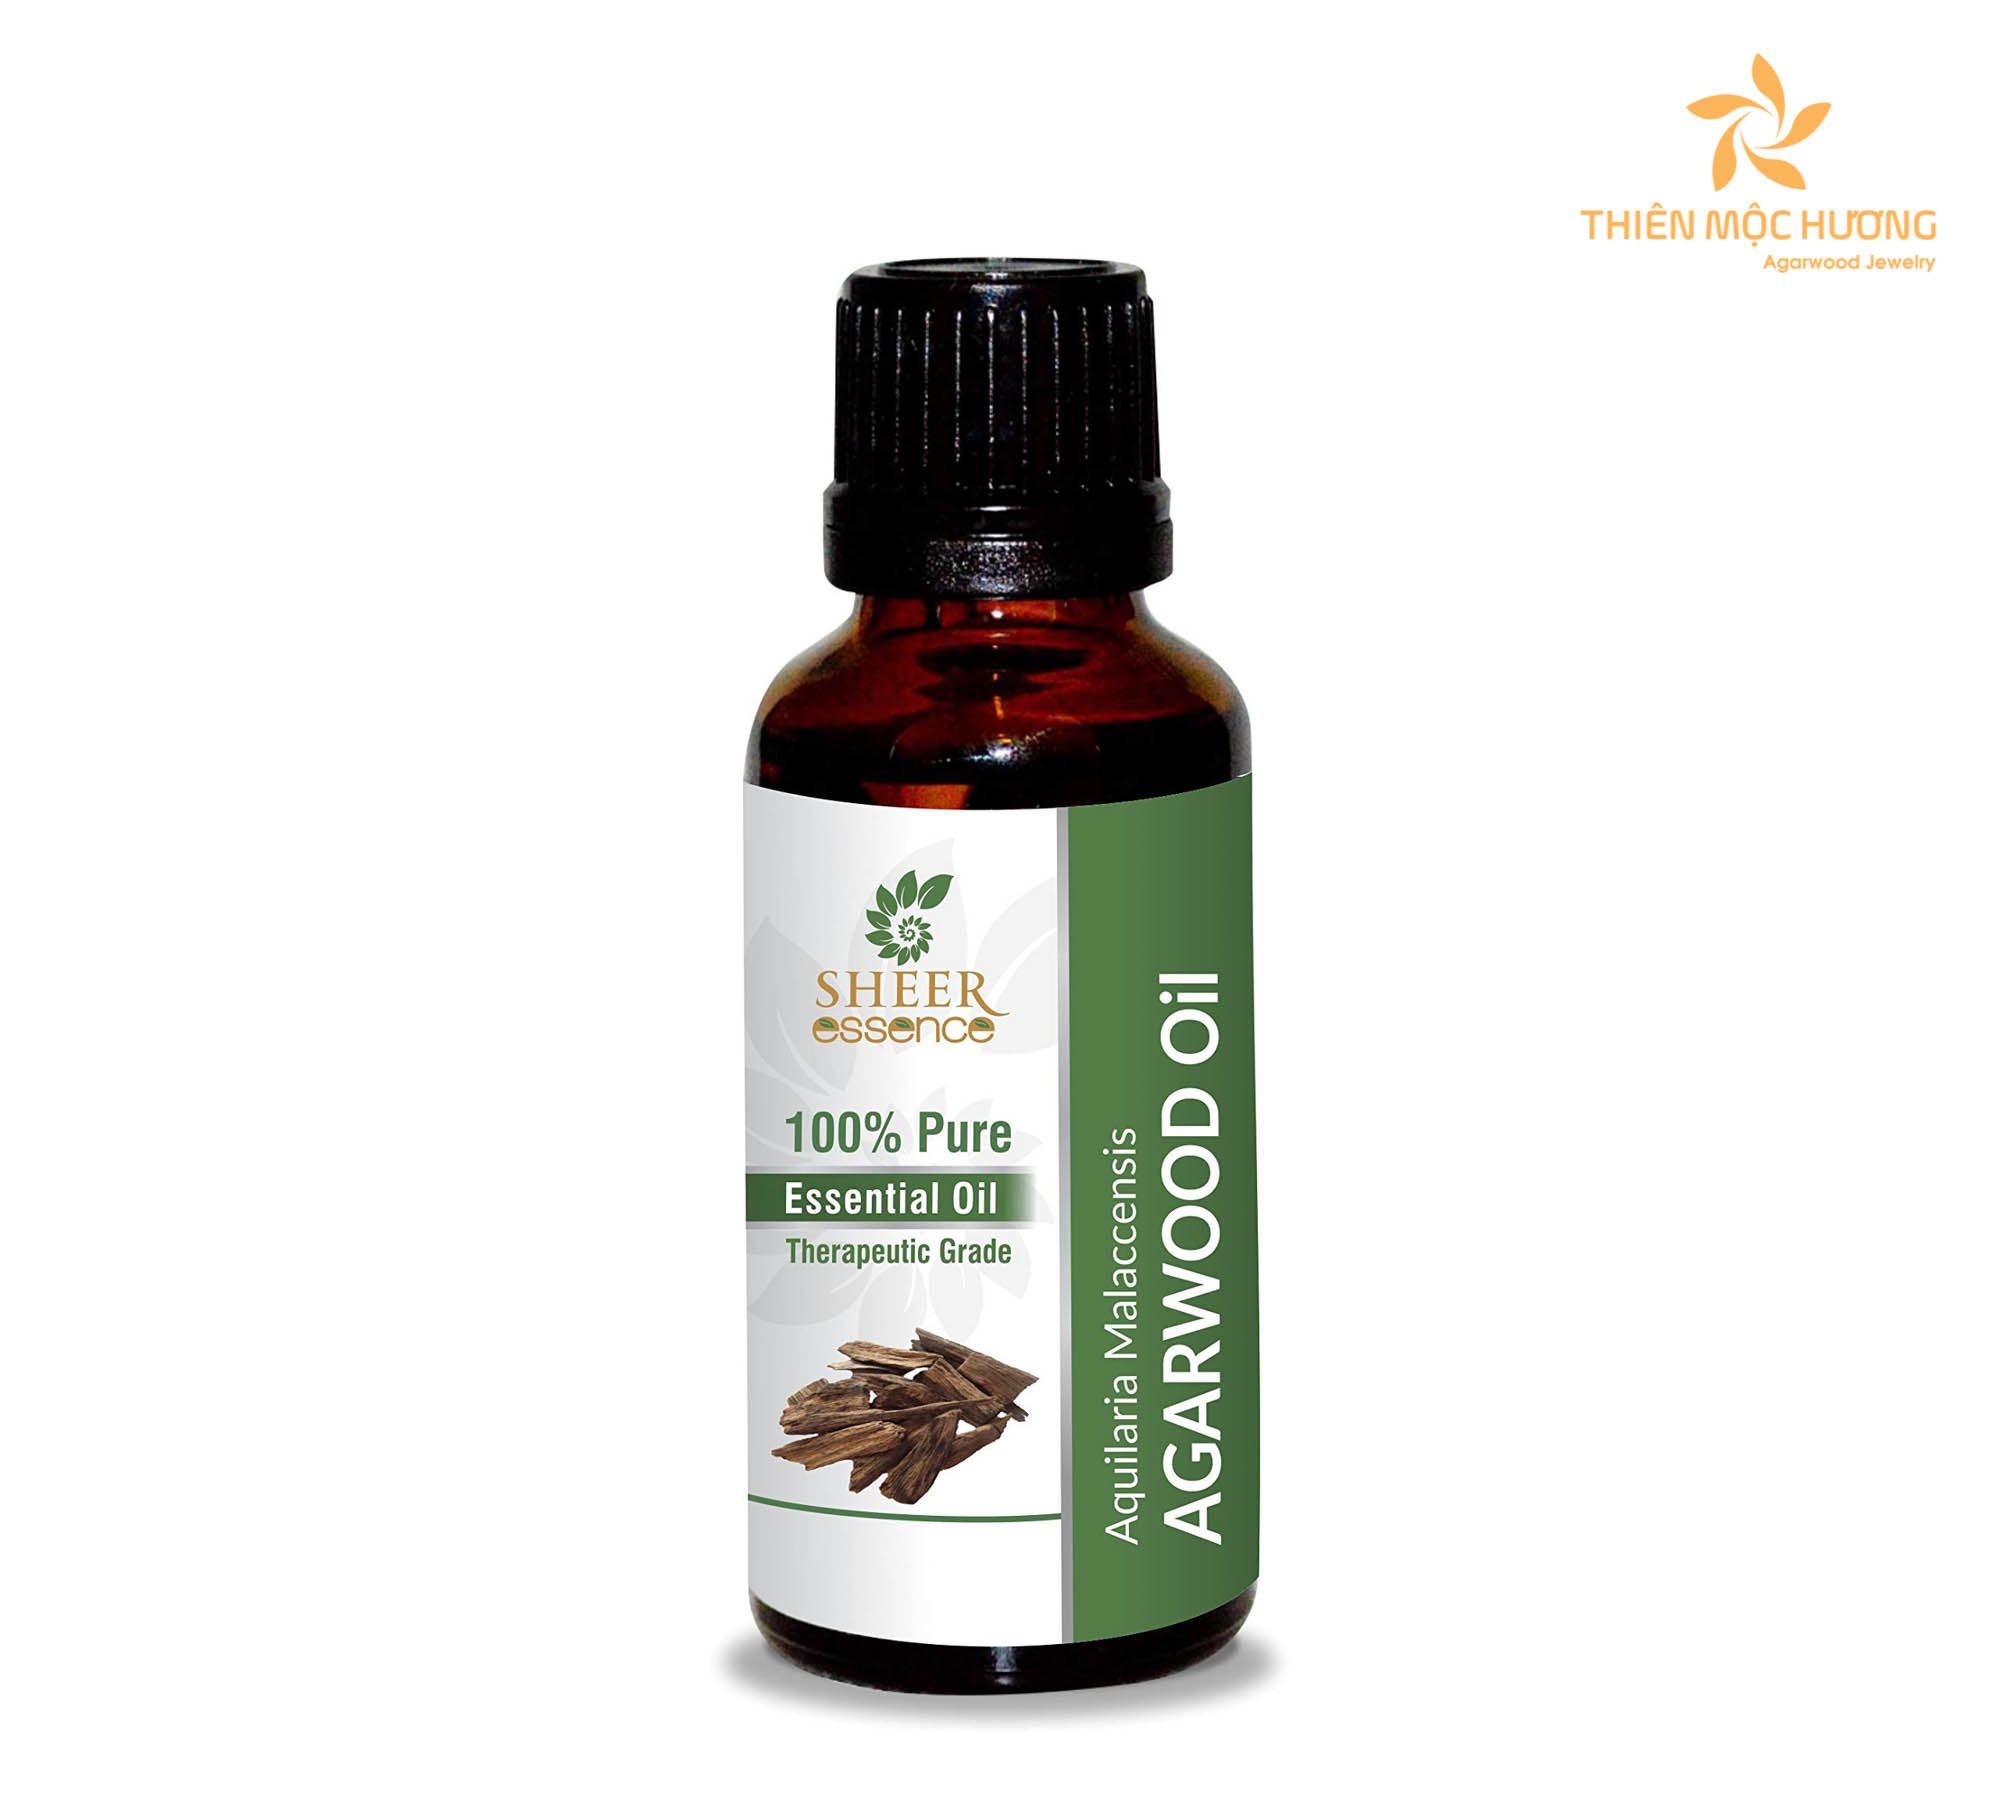 Thanks to its nourishing properties, agarwood revitalizes the skin, leaving it soft and supple.